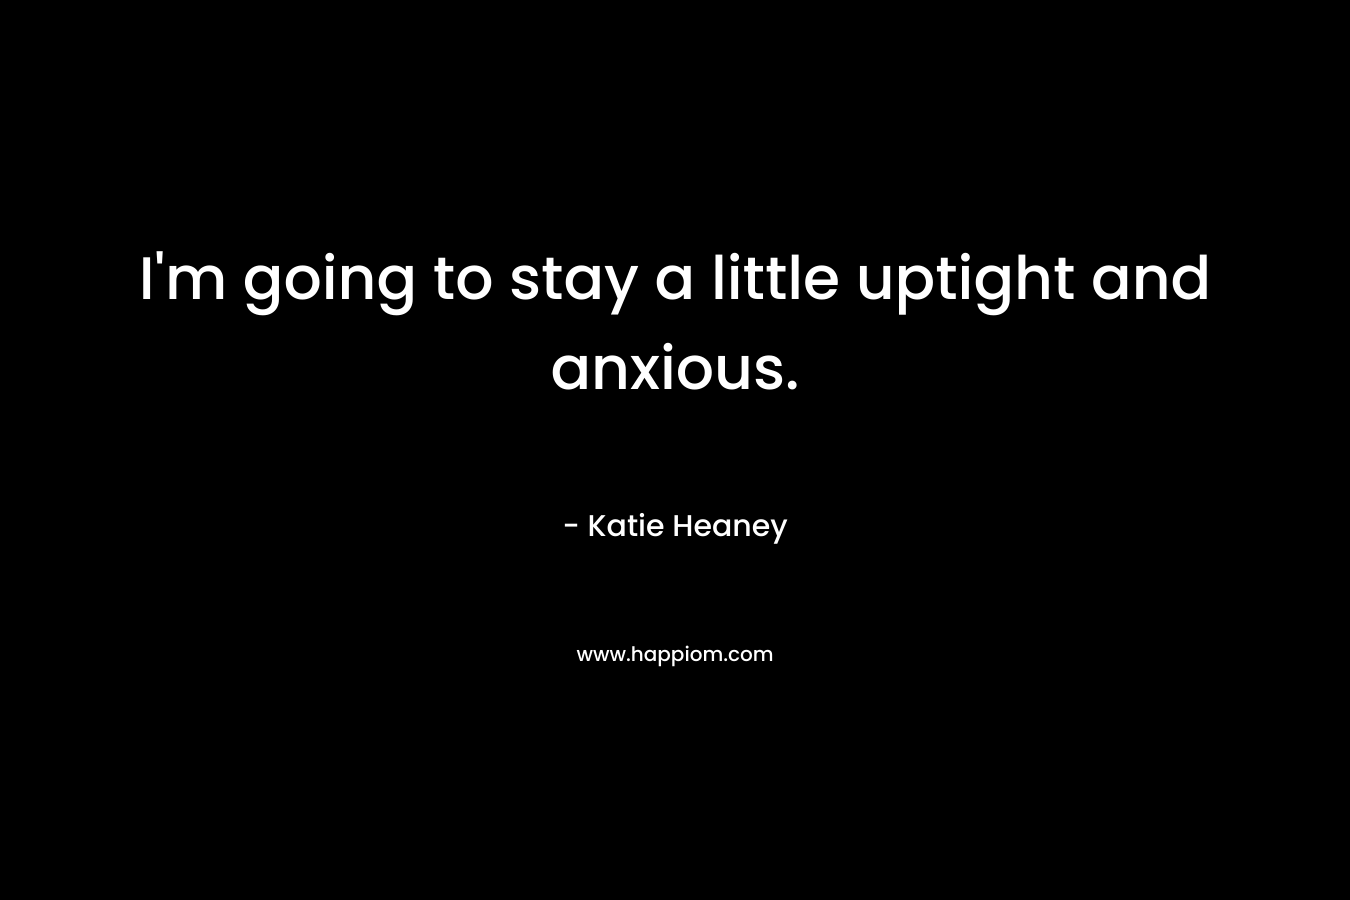 I’m going to stay a little uptight and anxious. – Katie Heaney